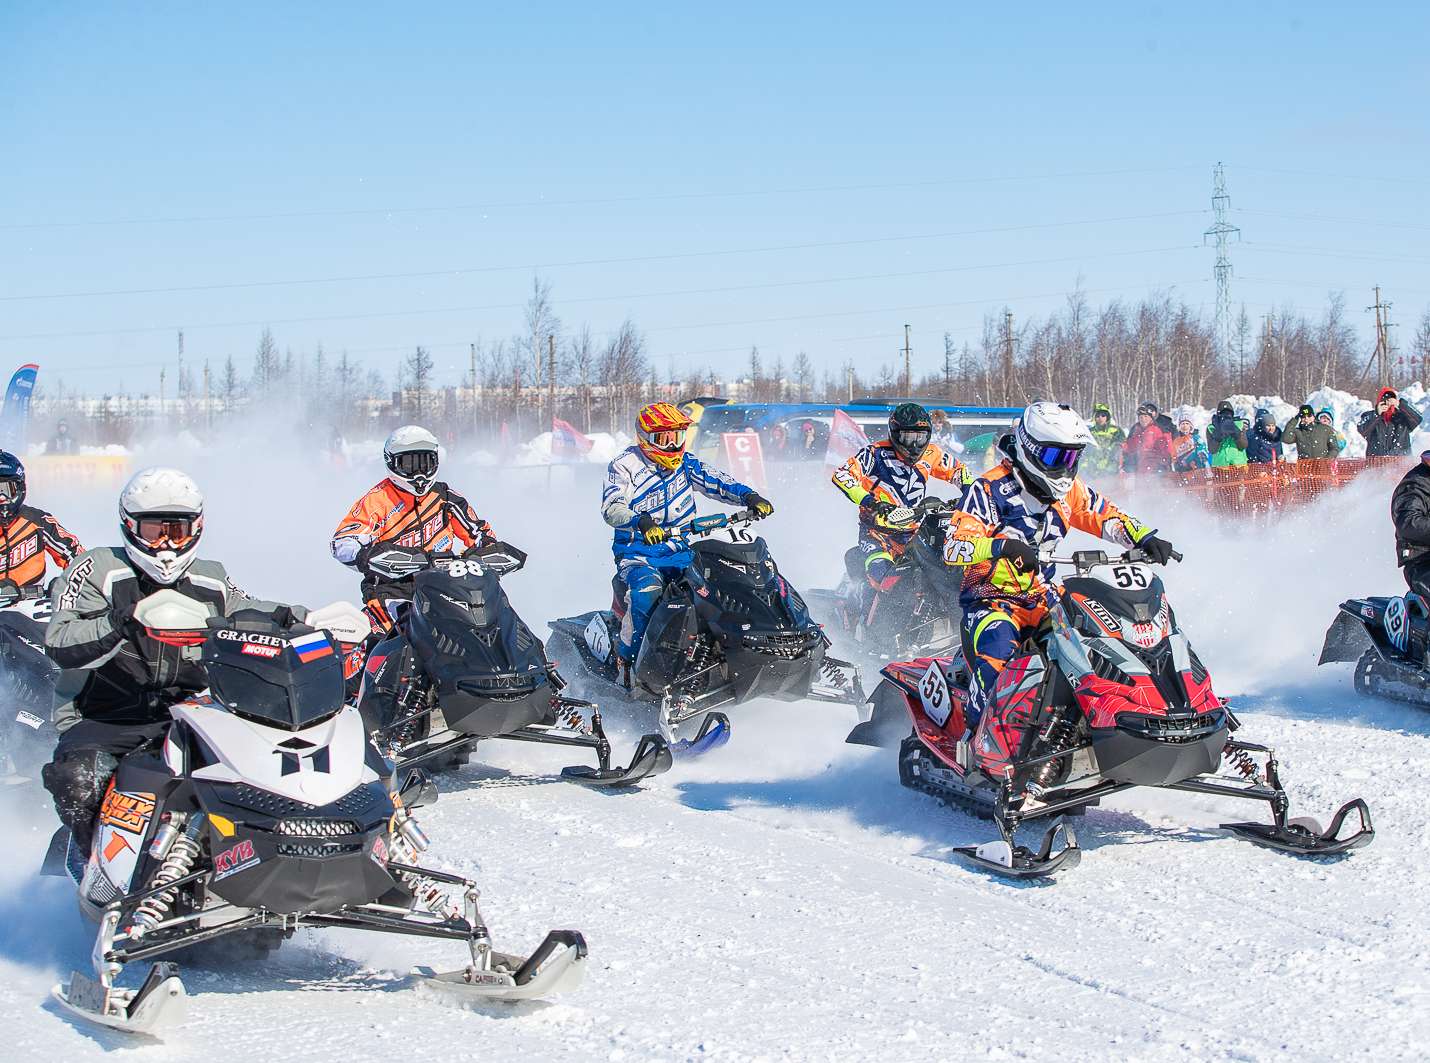 Fakel sports and technical club of Gazprom Dobycha Urengoy emerges victorious in 2018/2019 snocross season